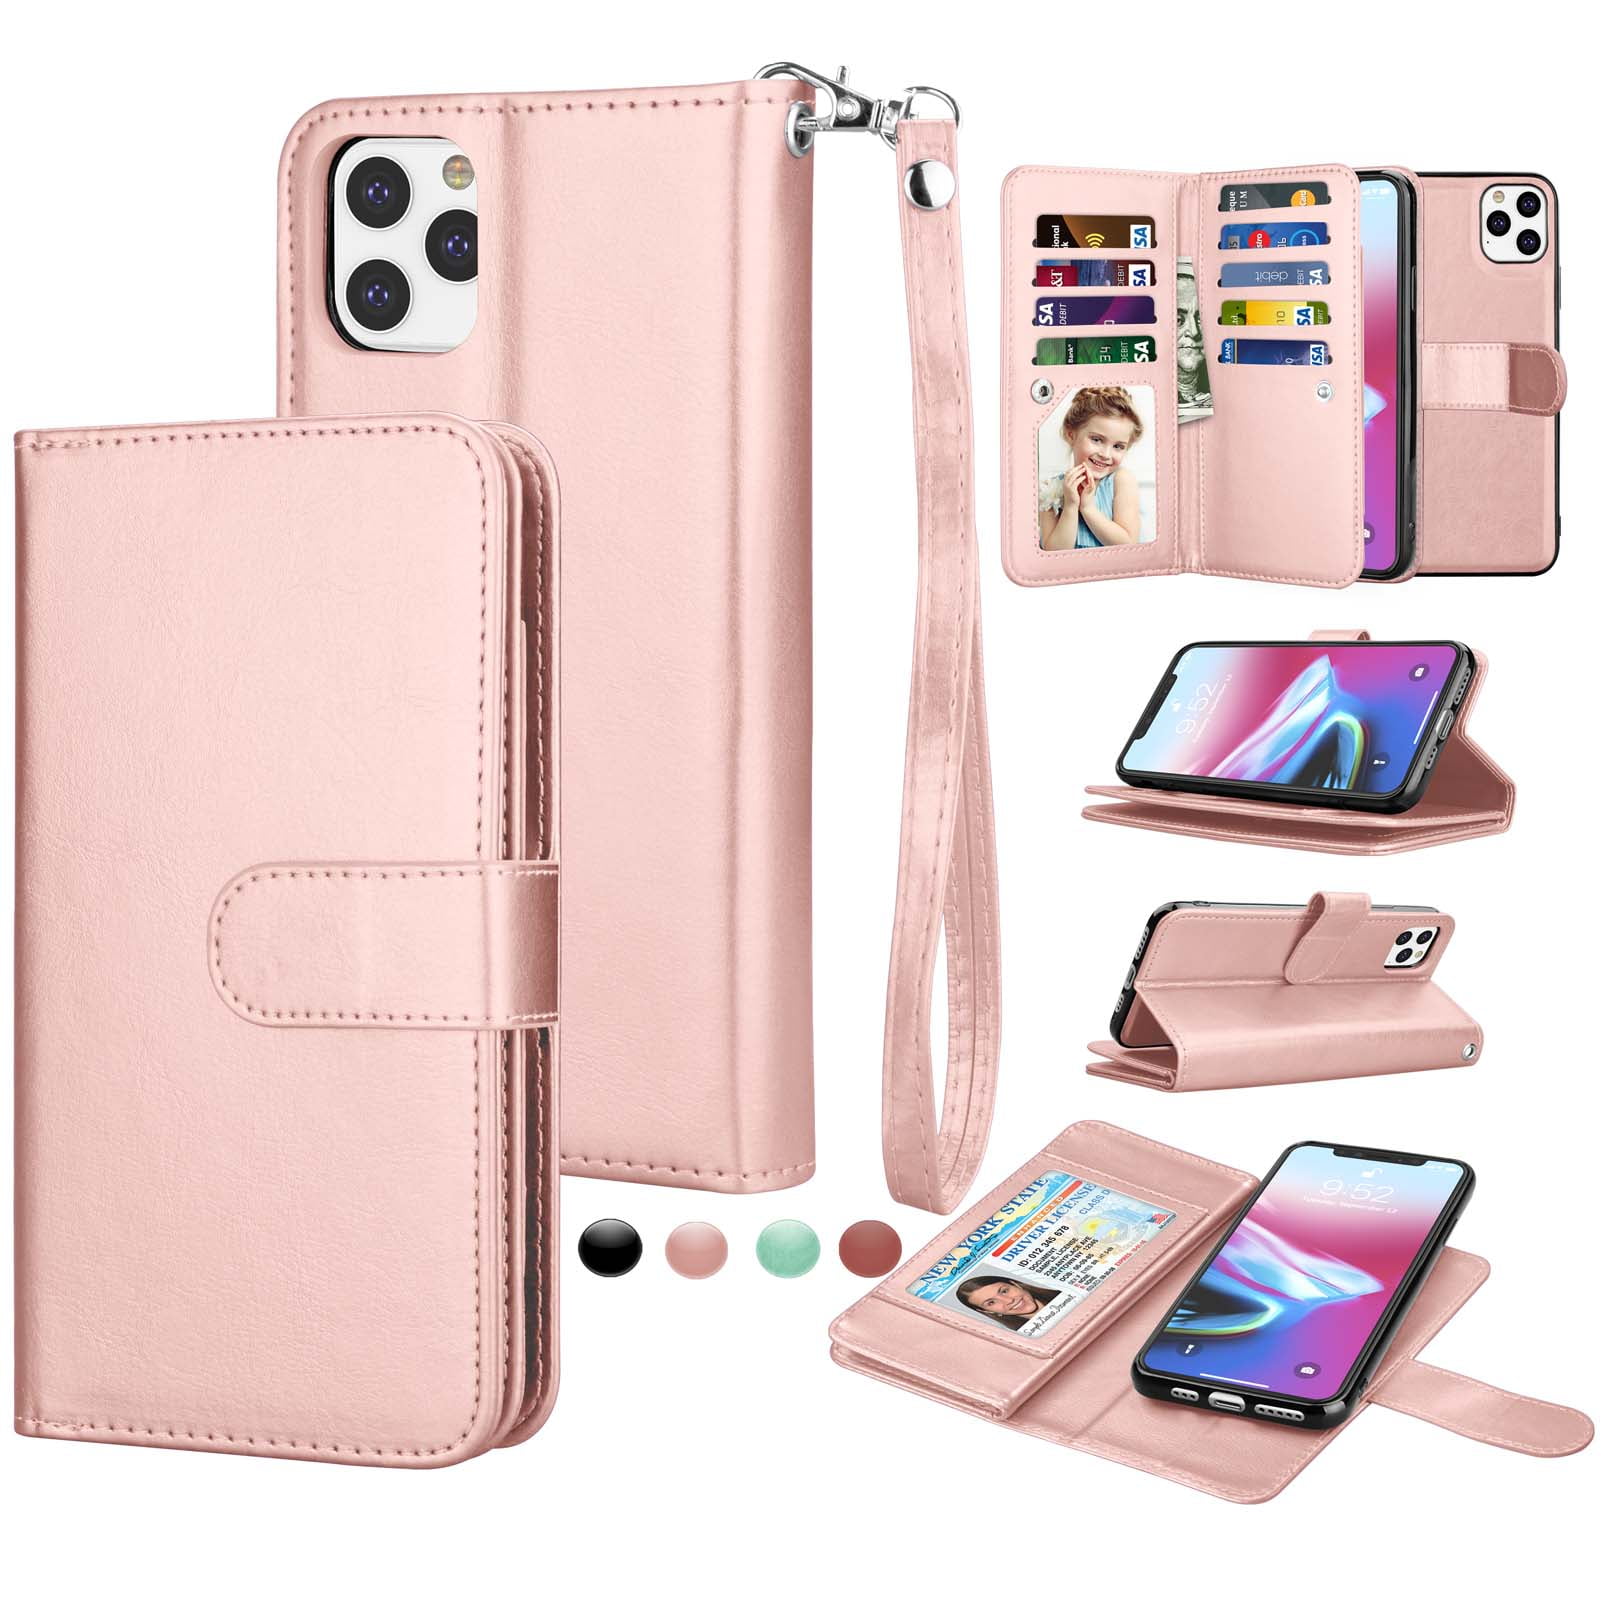 Bling Glitter PU Leather Flip Folio Case with Card Holder Stand Function Magnetic Closure Inner Soft TPU Protective Cover,Rose Gold JAWSEU Wallet Case Compatible with iPhone X/XS 